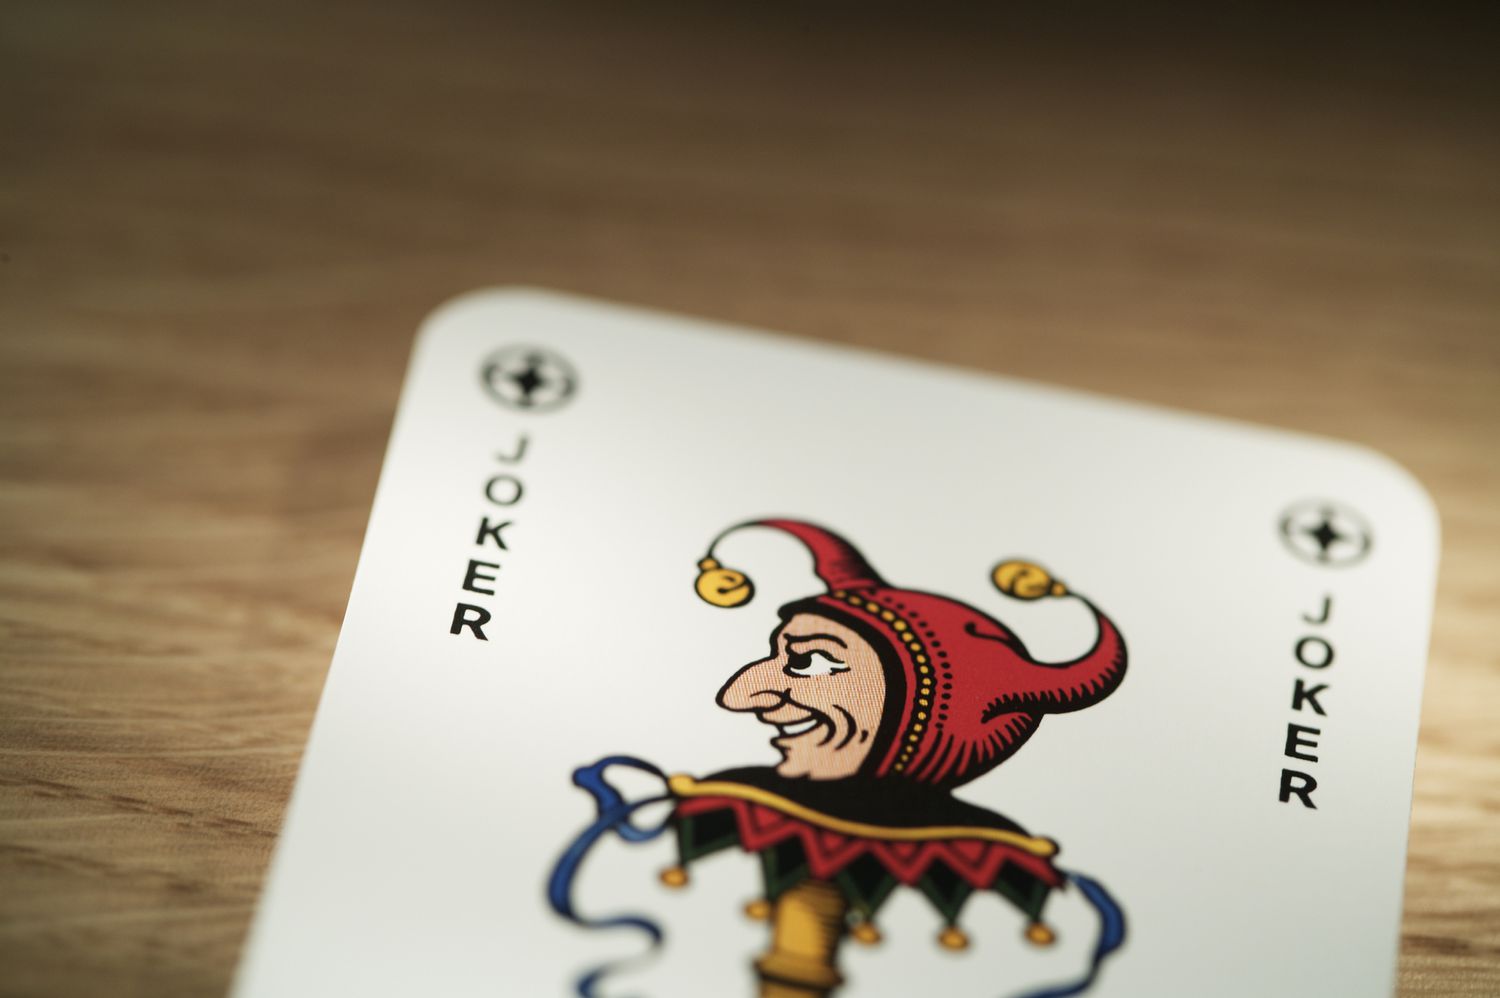 What is the role of the joker card in Casino War?